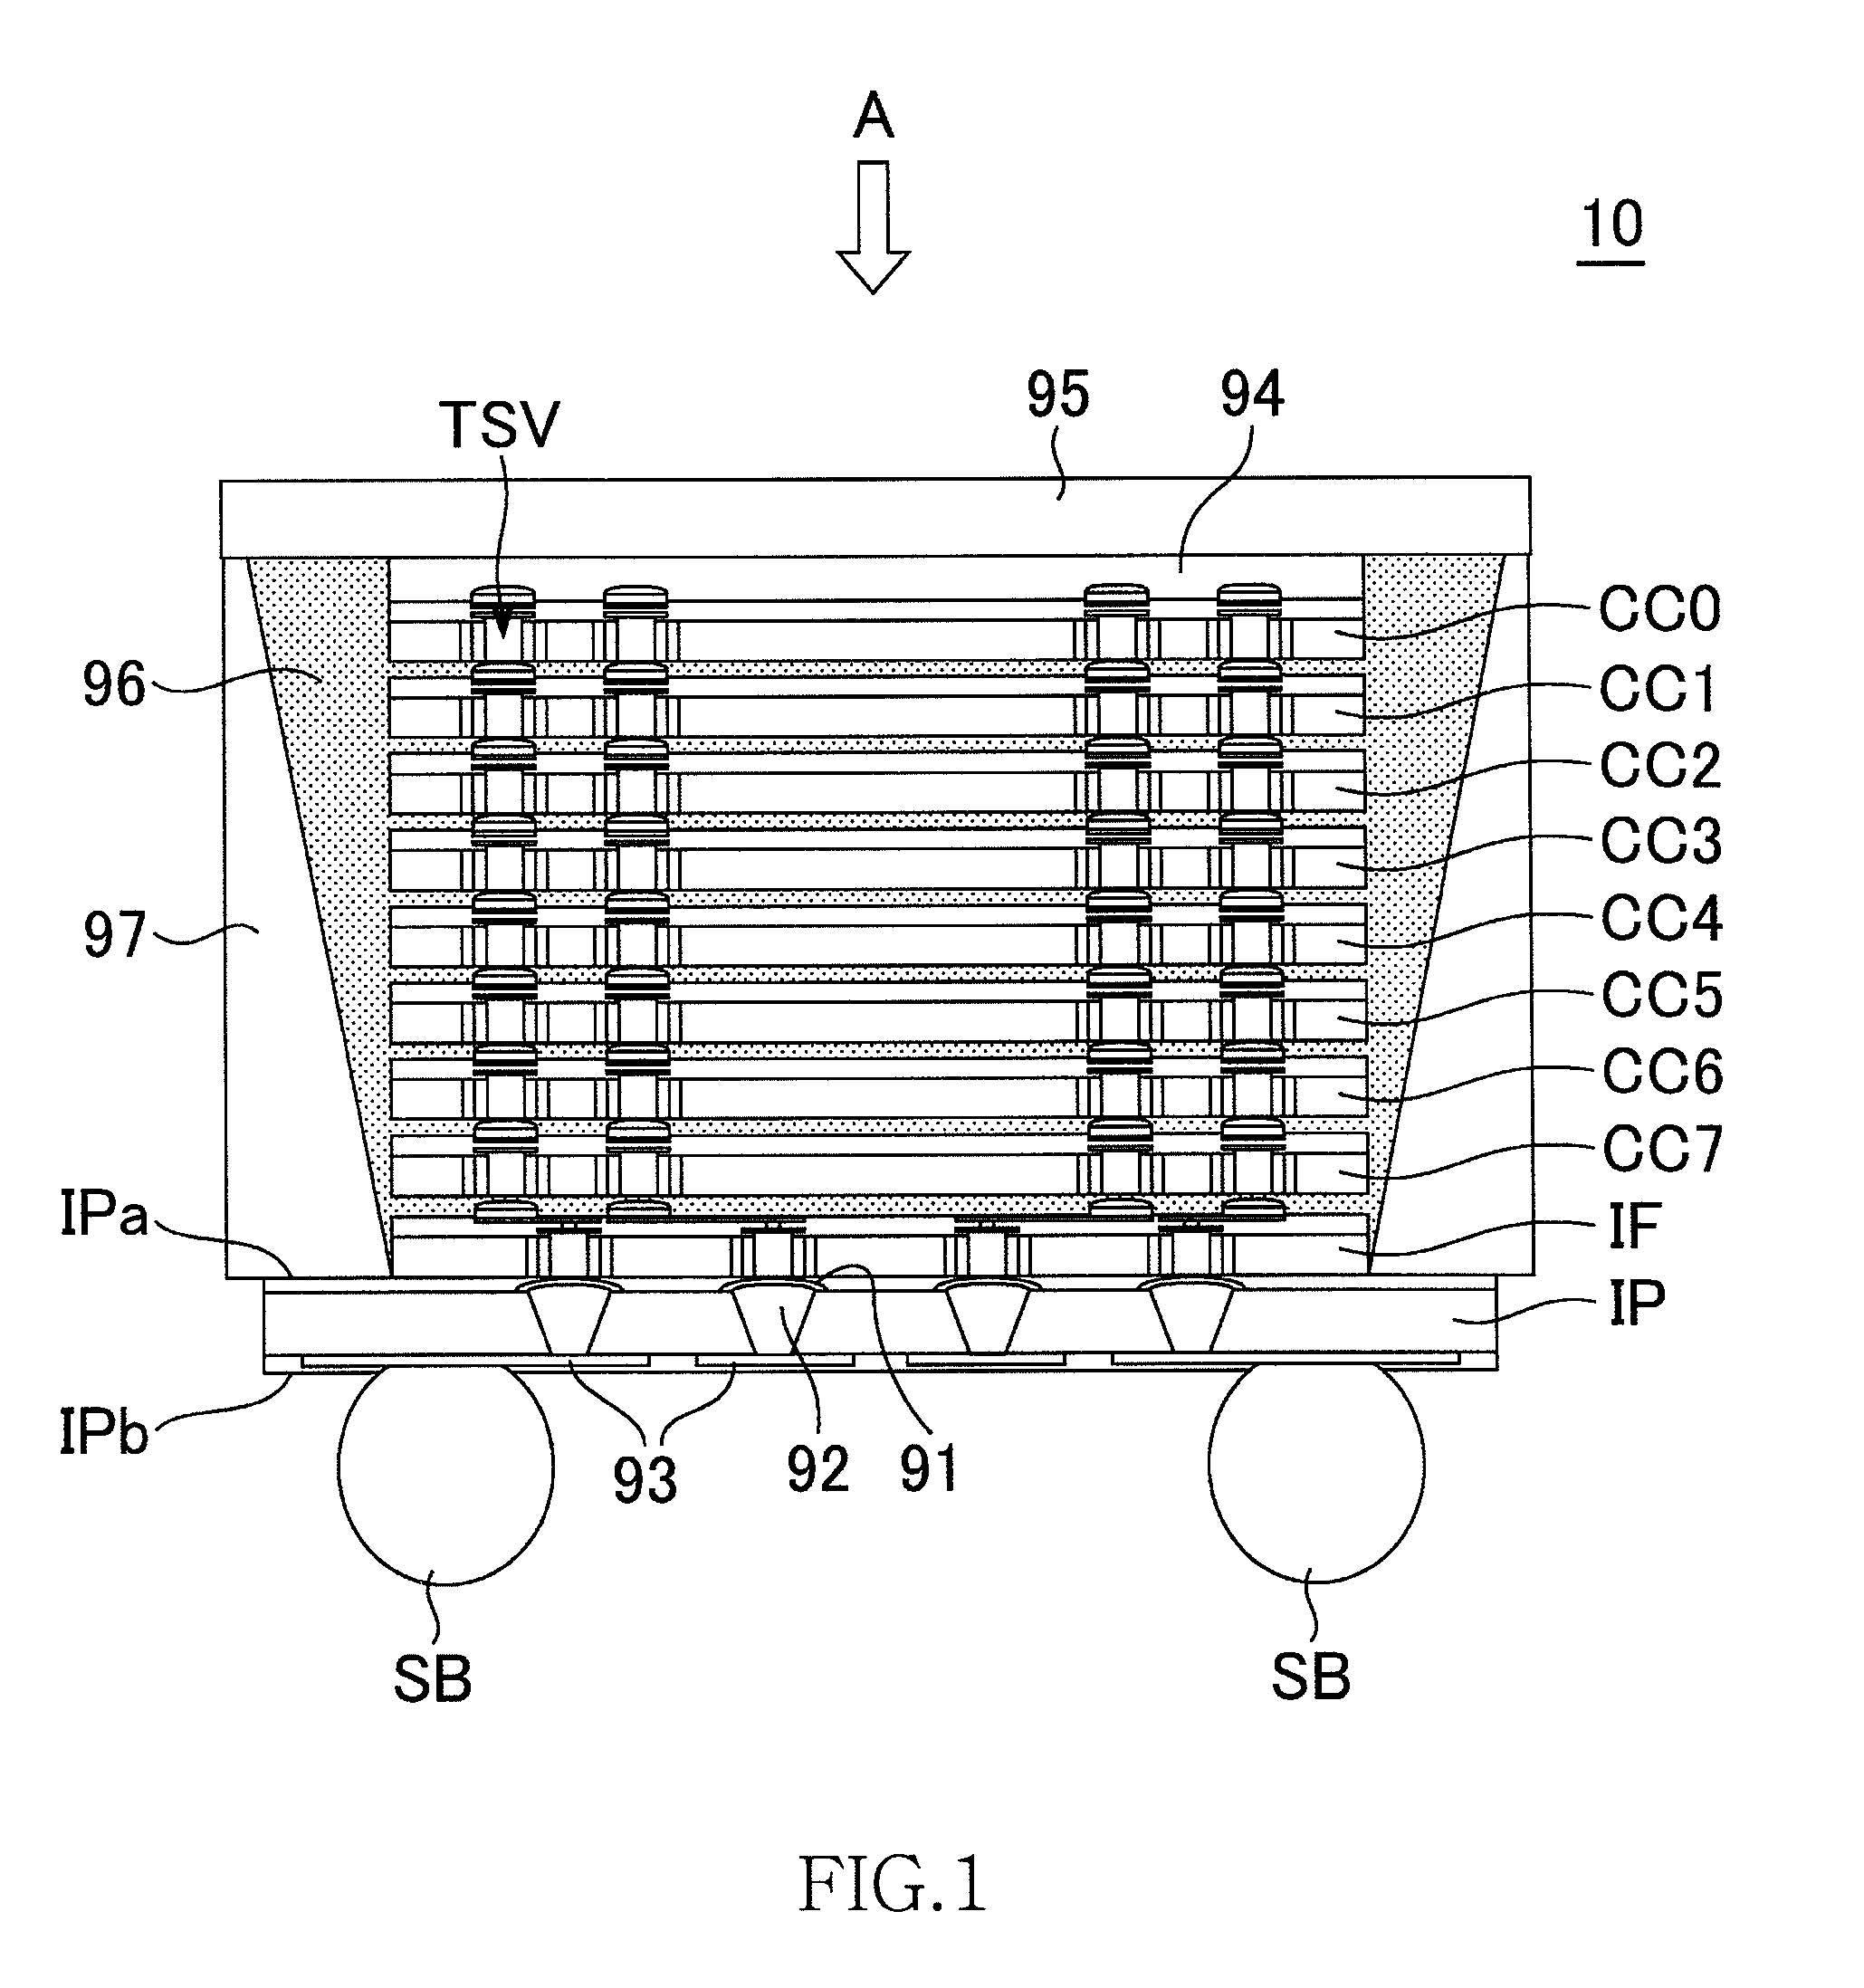 Semiconductor memory device incorporating an interface chip for selectively refreshing memory cells in core chips